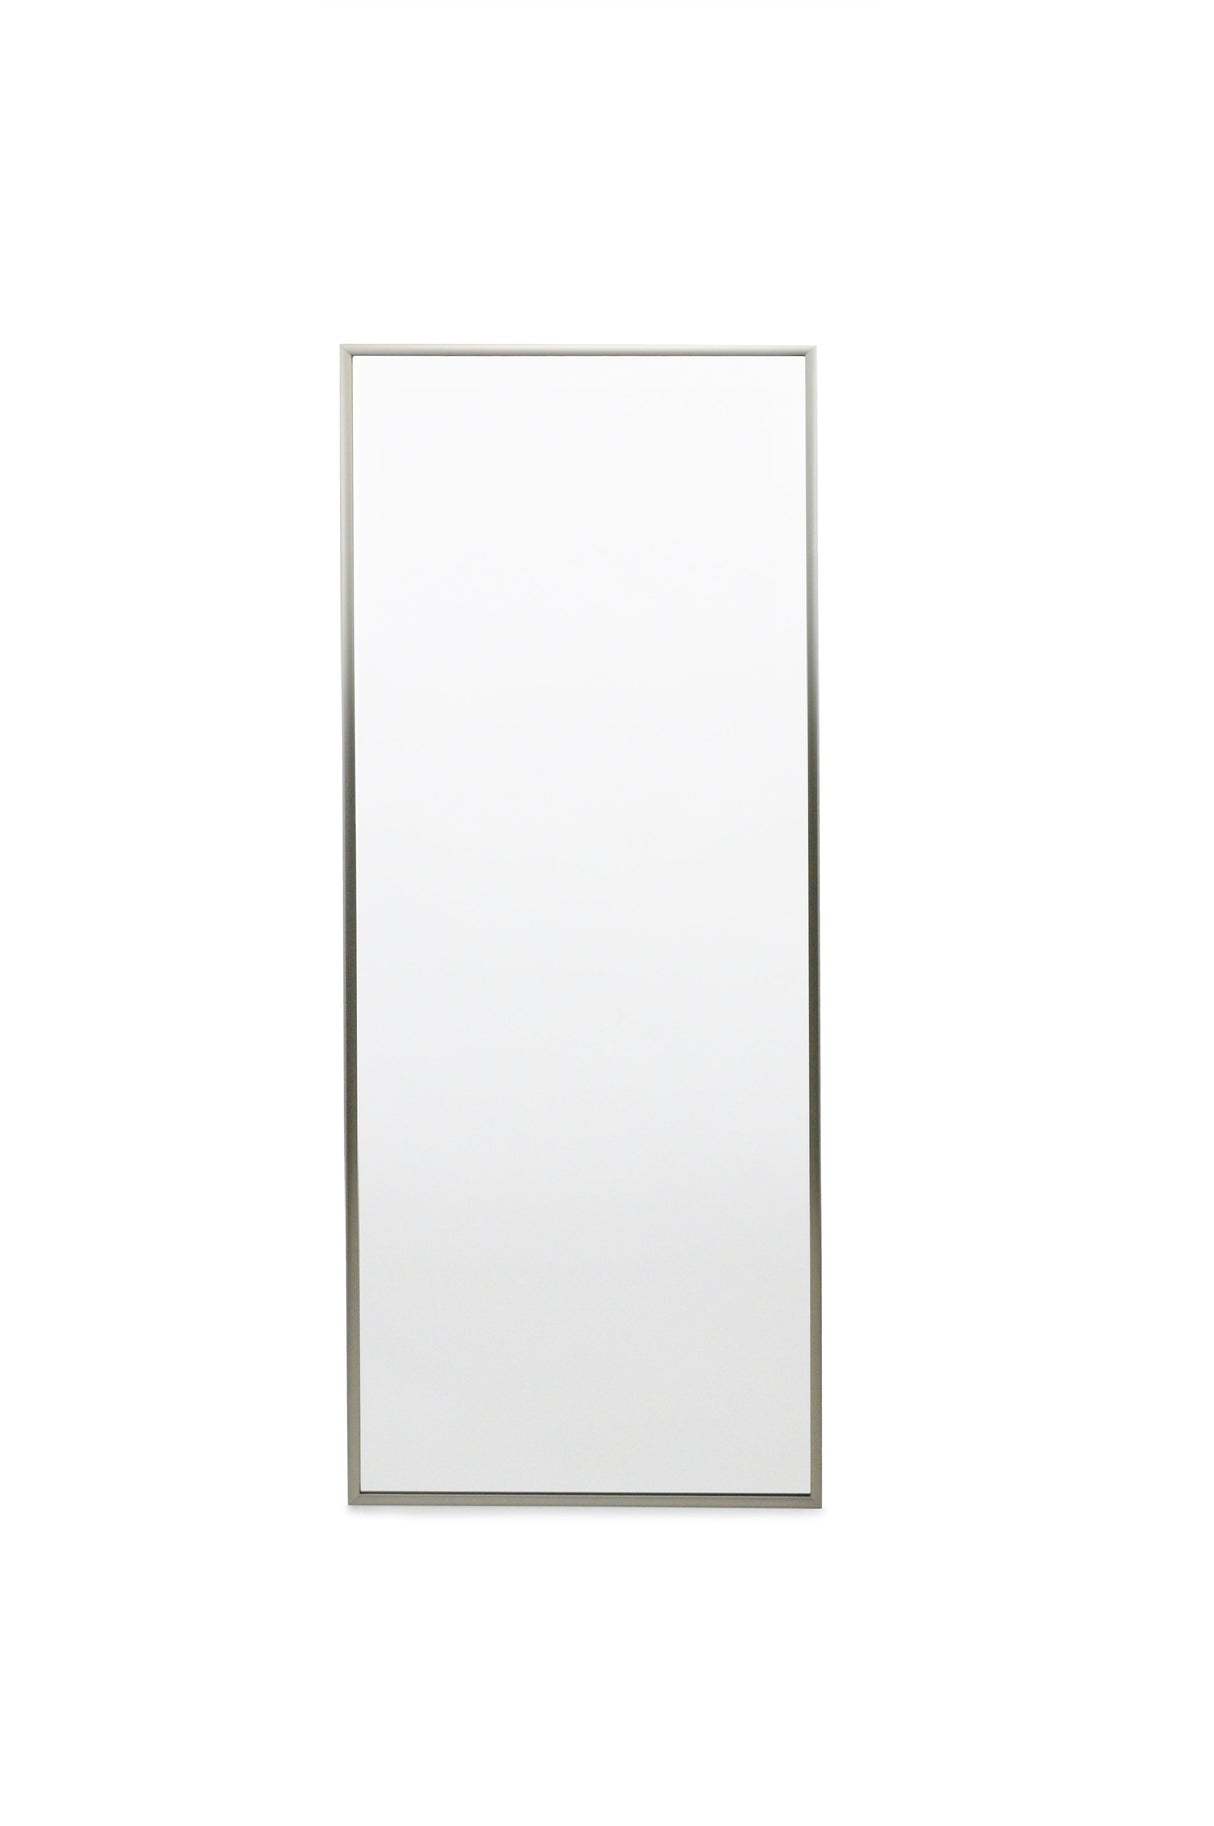 TAG Hardware Elite Fixed Mirror with Sleek Low-Profile Full-Frame Design, 35" or 47 3/8" Height